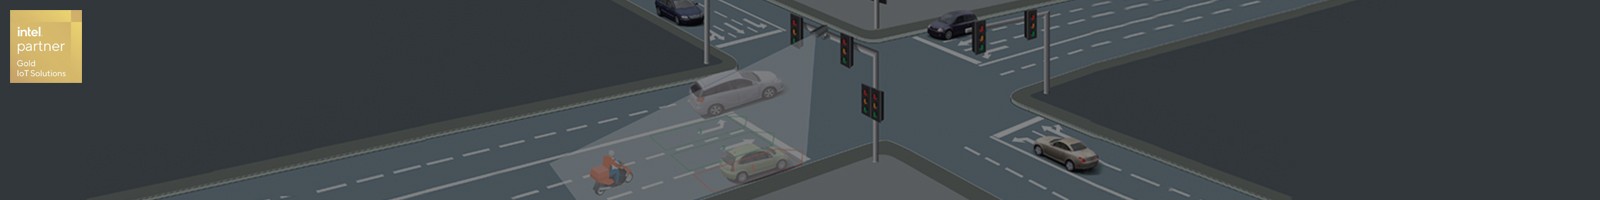 TrafScan®- Vehicle Detection Camera